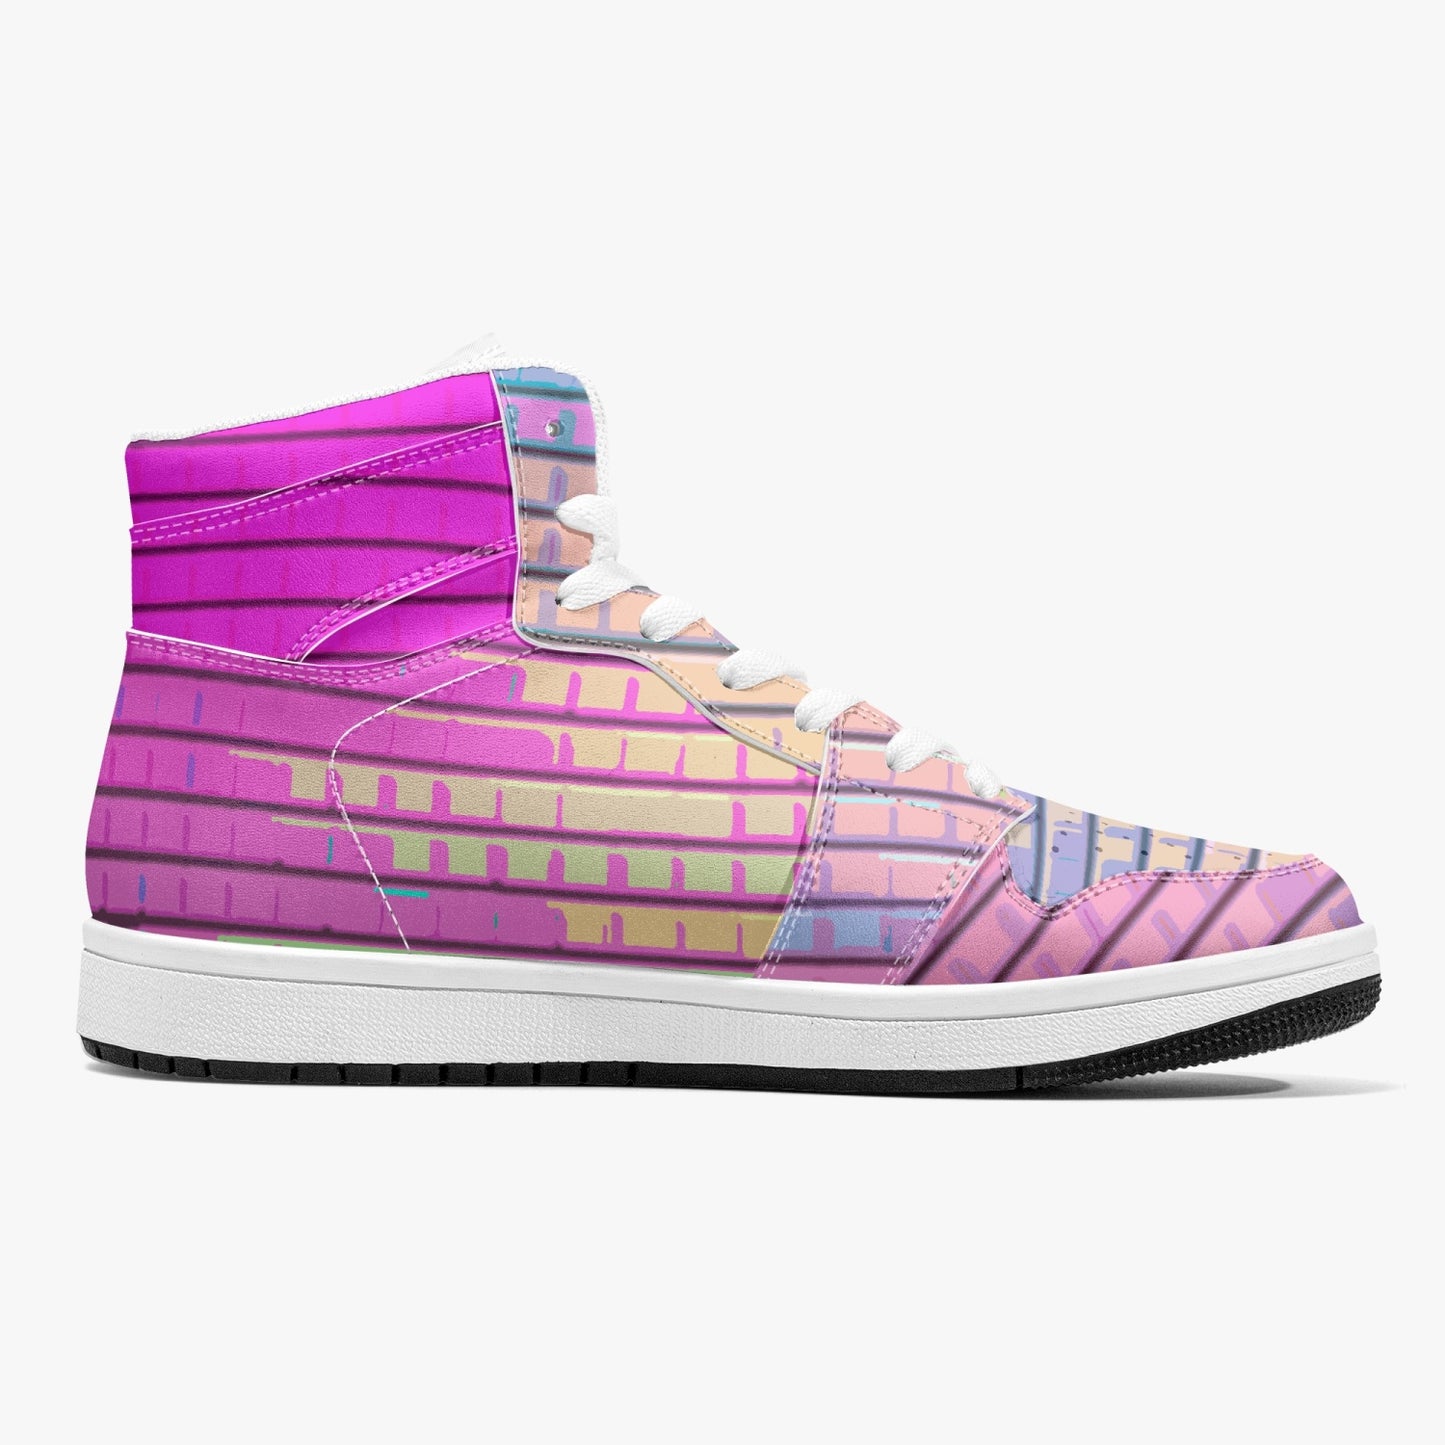 Almost Pink - Macr.in (High-Top Leather Sneakers)